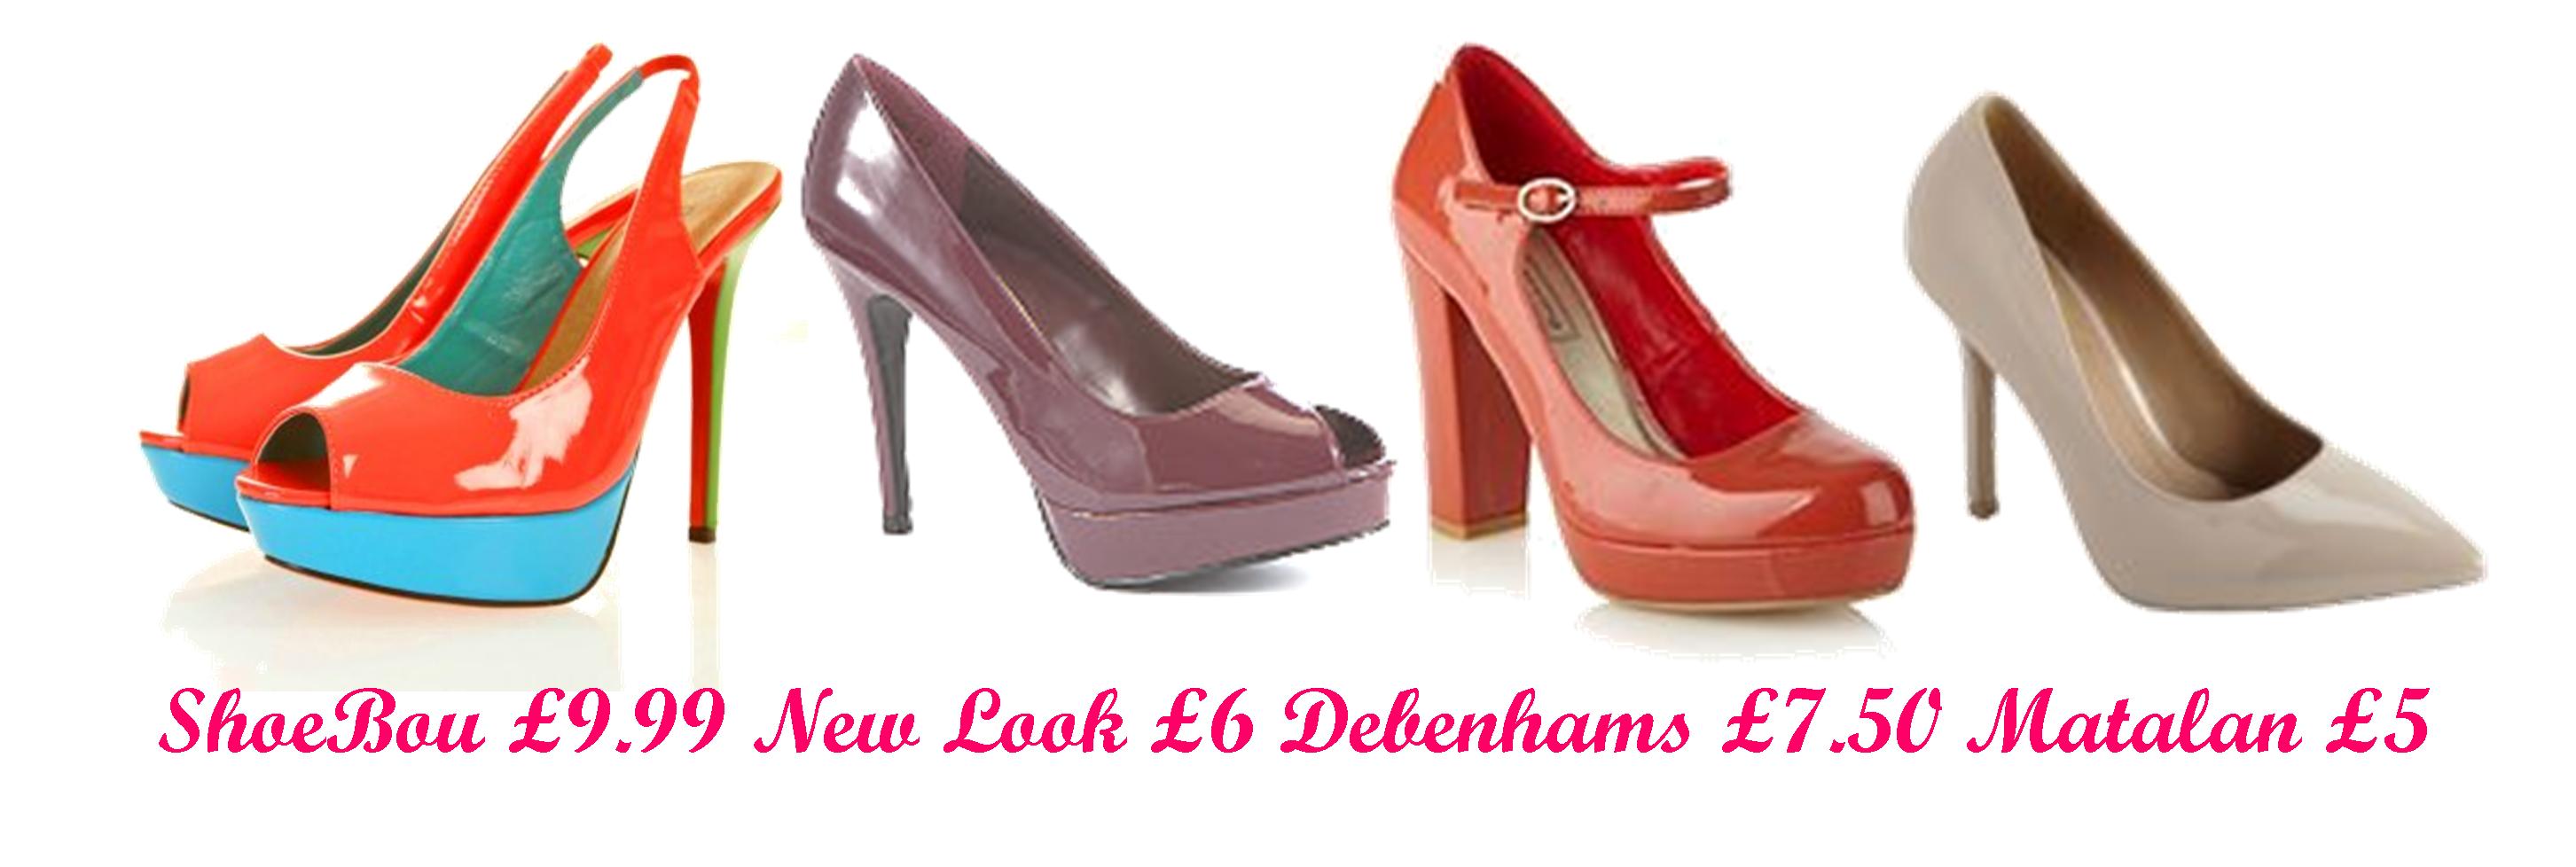 tuesday shoesday patent leather shoes in january 2013 sales new look shoebou debenhams matalan